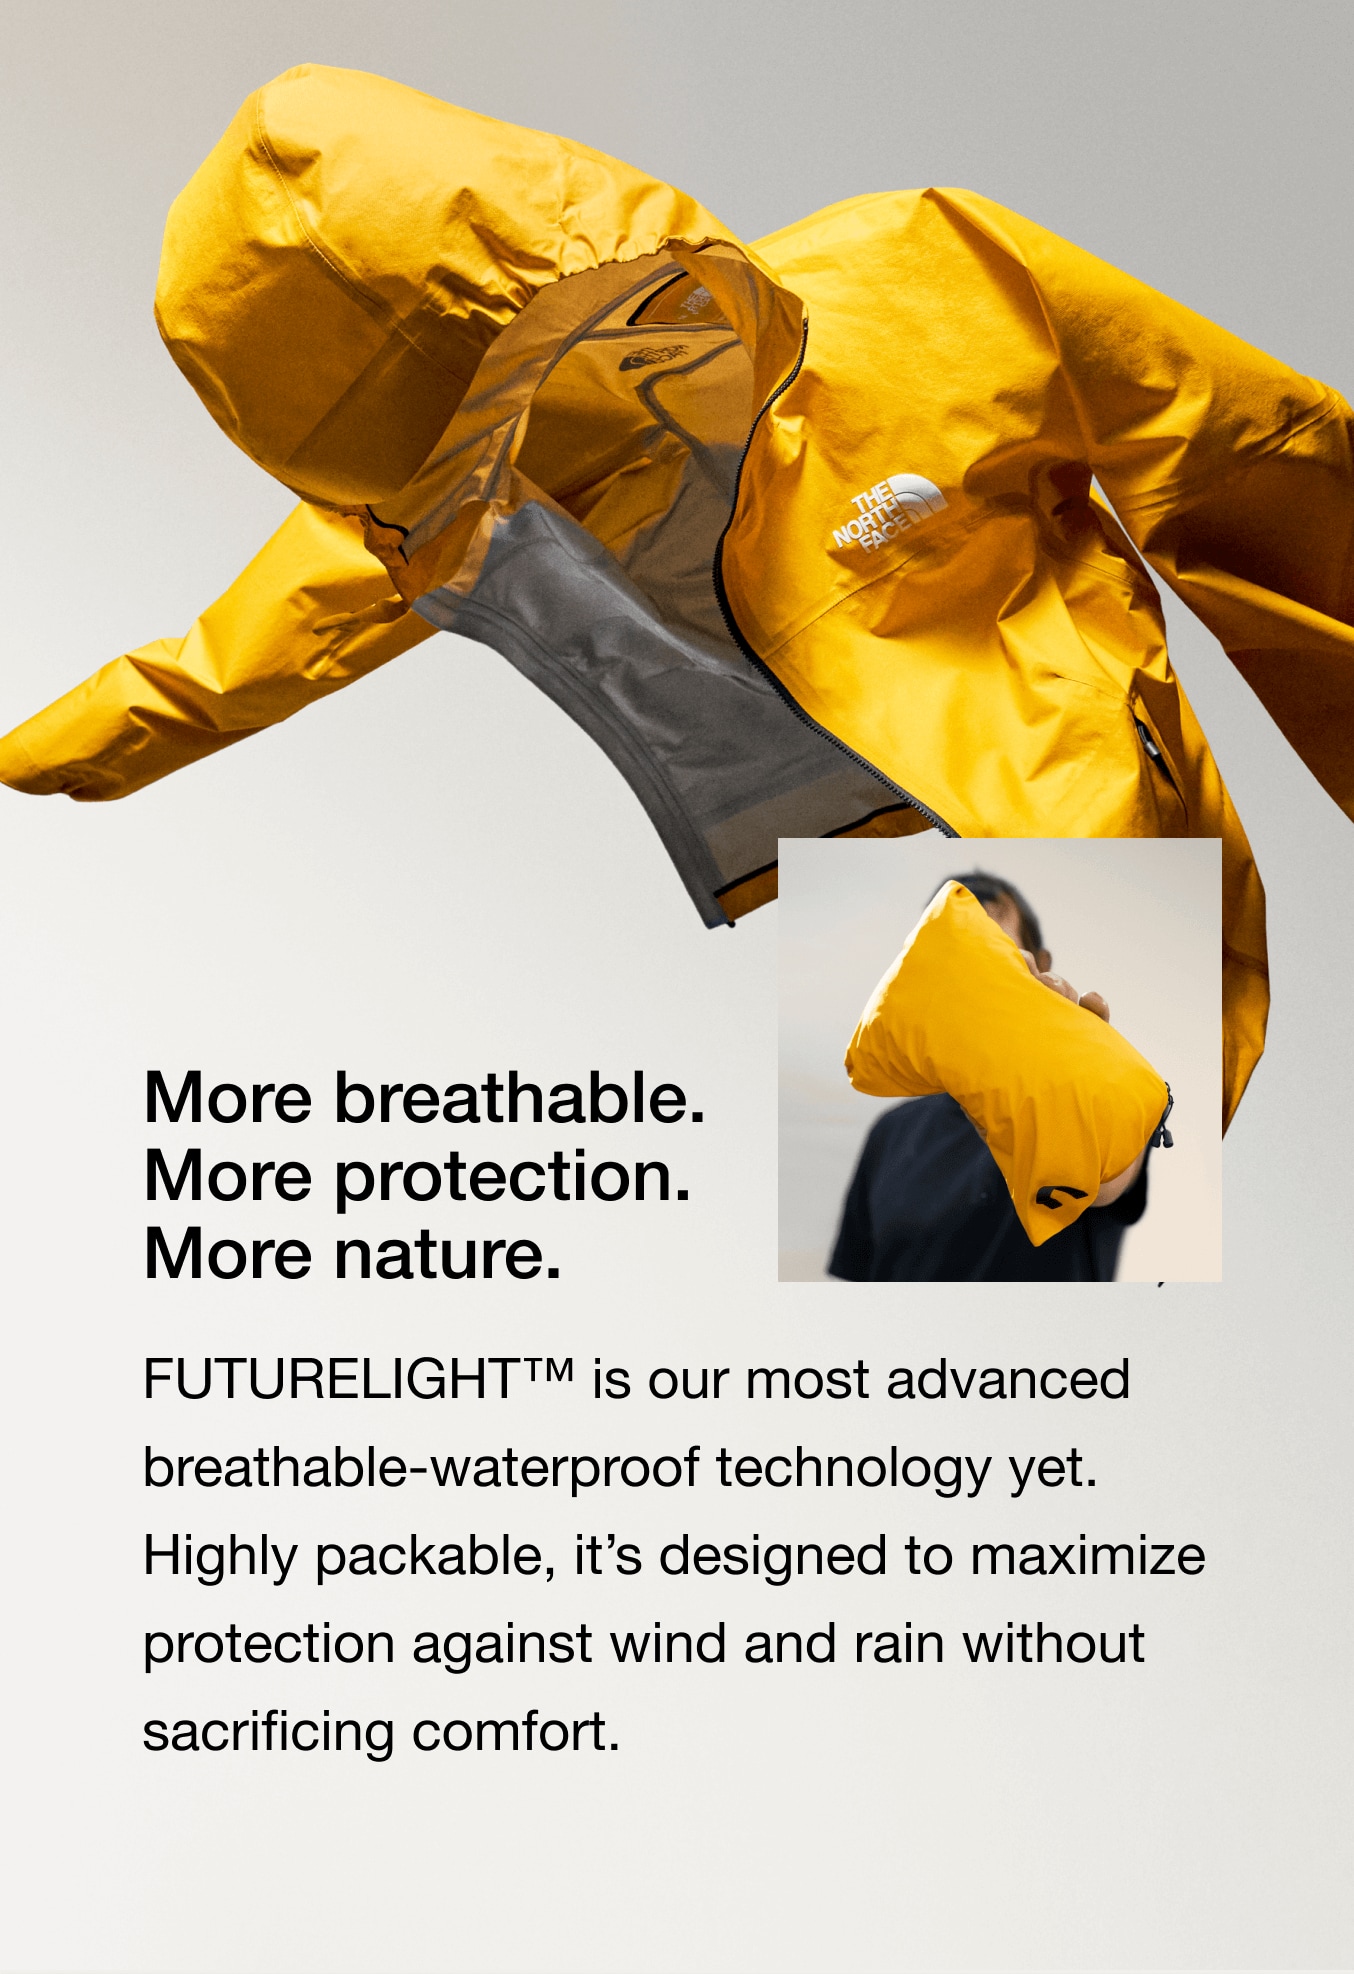 The FUTURELIGHT™ Papsura Jacket floats in front of a white background with an overlayed image showcasing its packability.